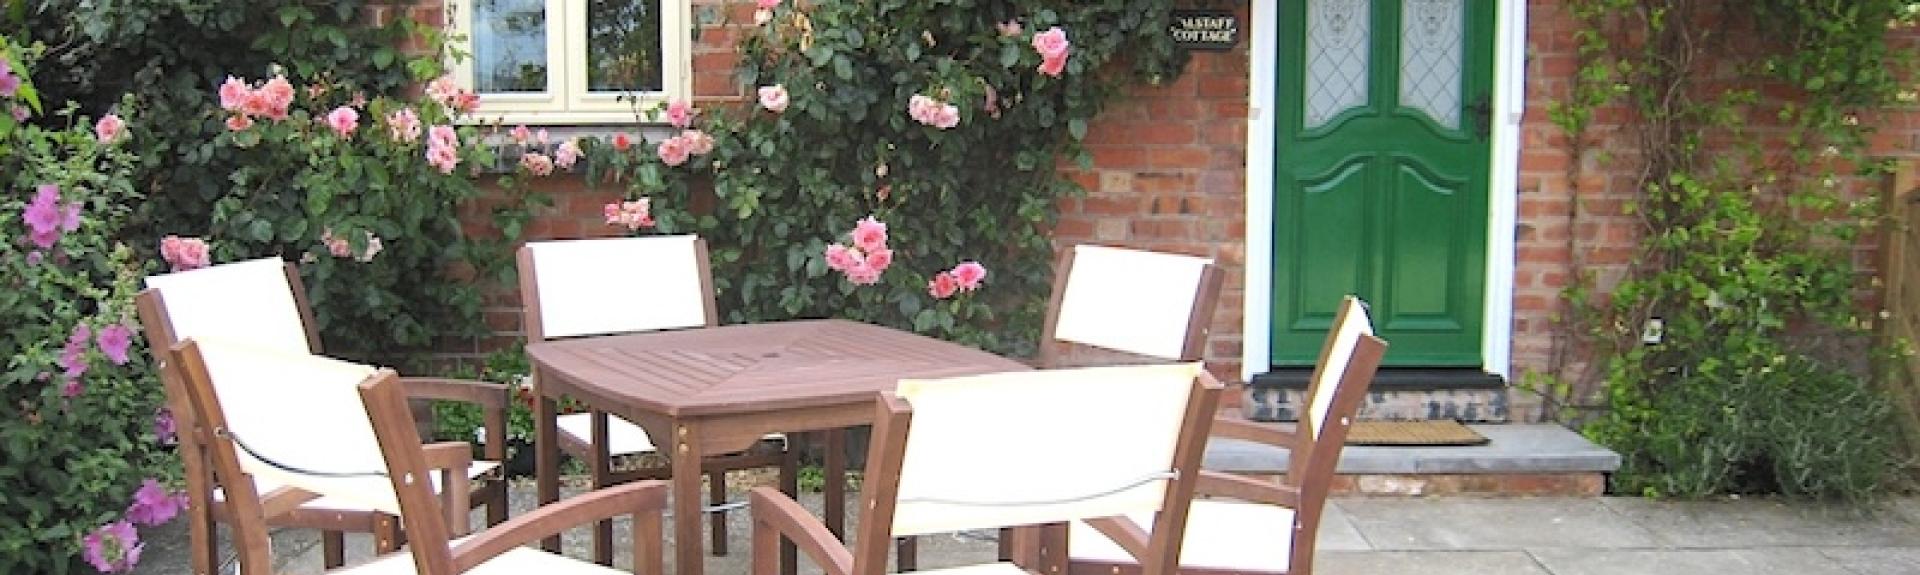 Exterior of  brick-built cottage clad with a rambling rose and overlooking a paved area with dining tsable and chairs